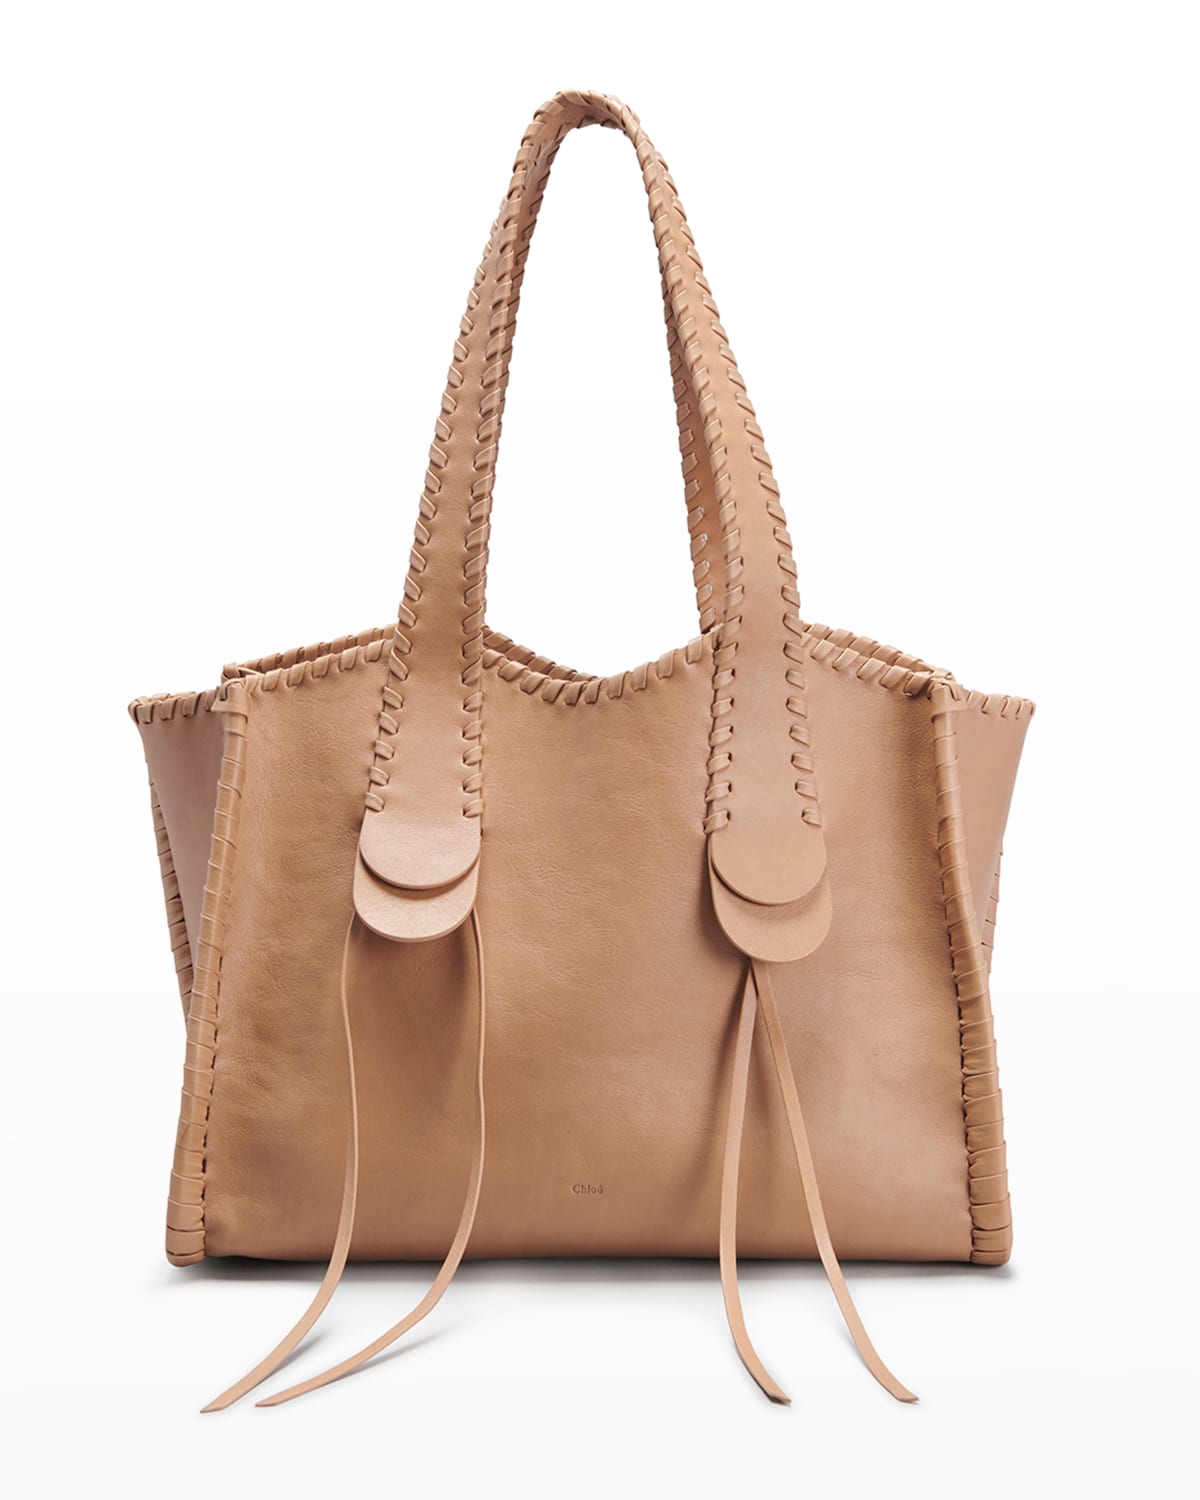 CHLOÉ MONY LARGE WHIPSTITCH LEATHER TOTE BAG